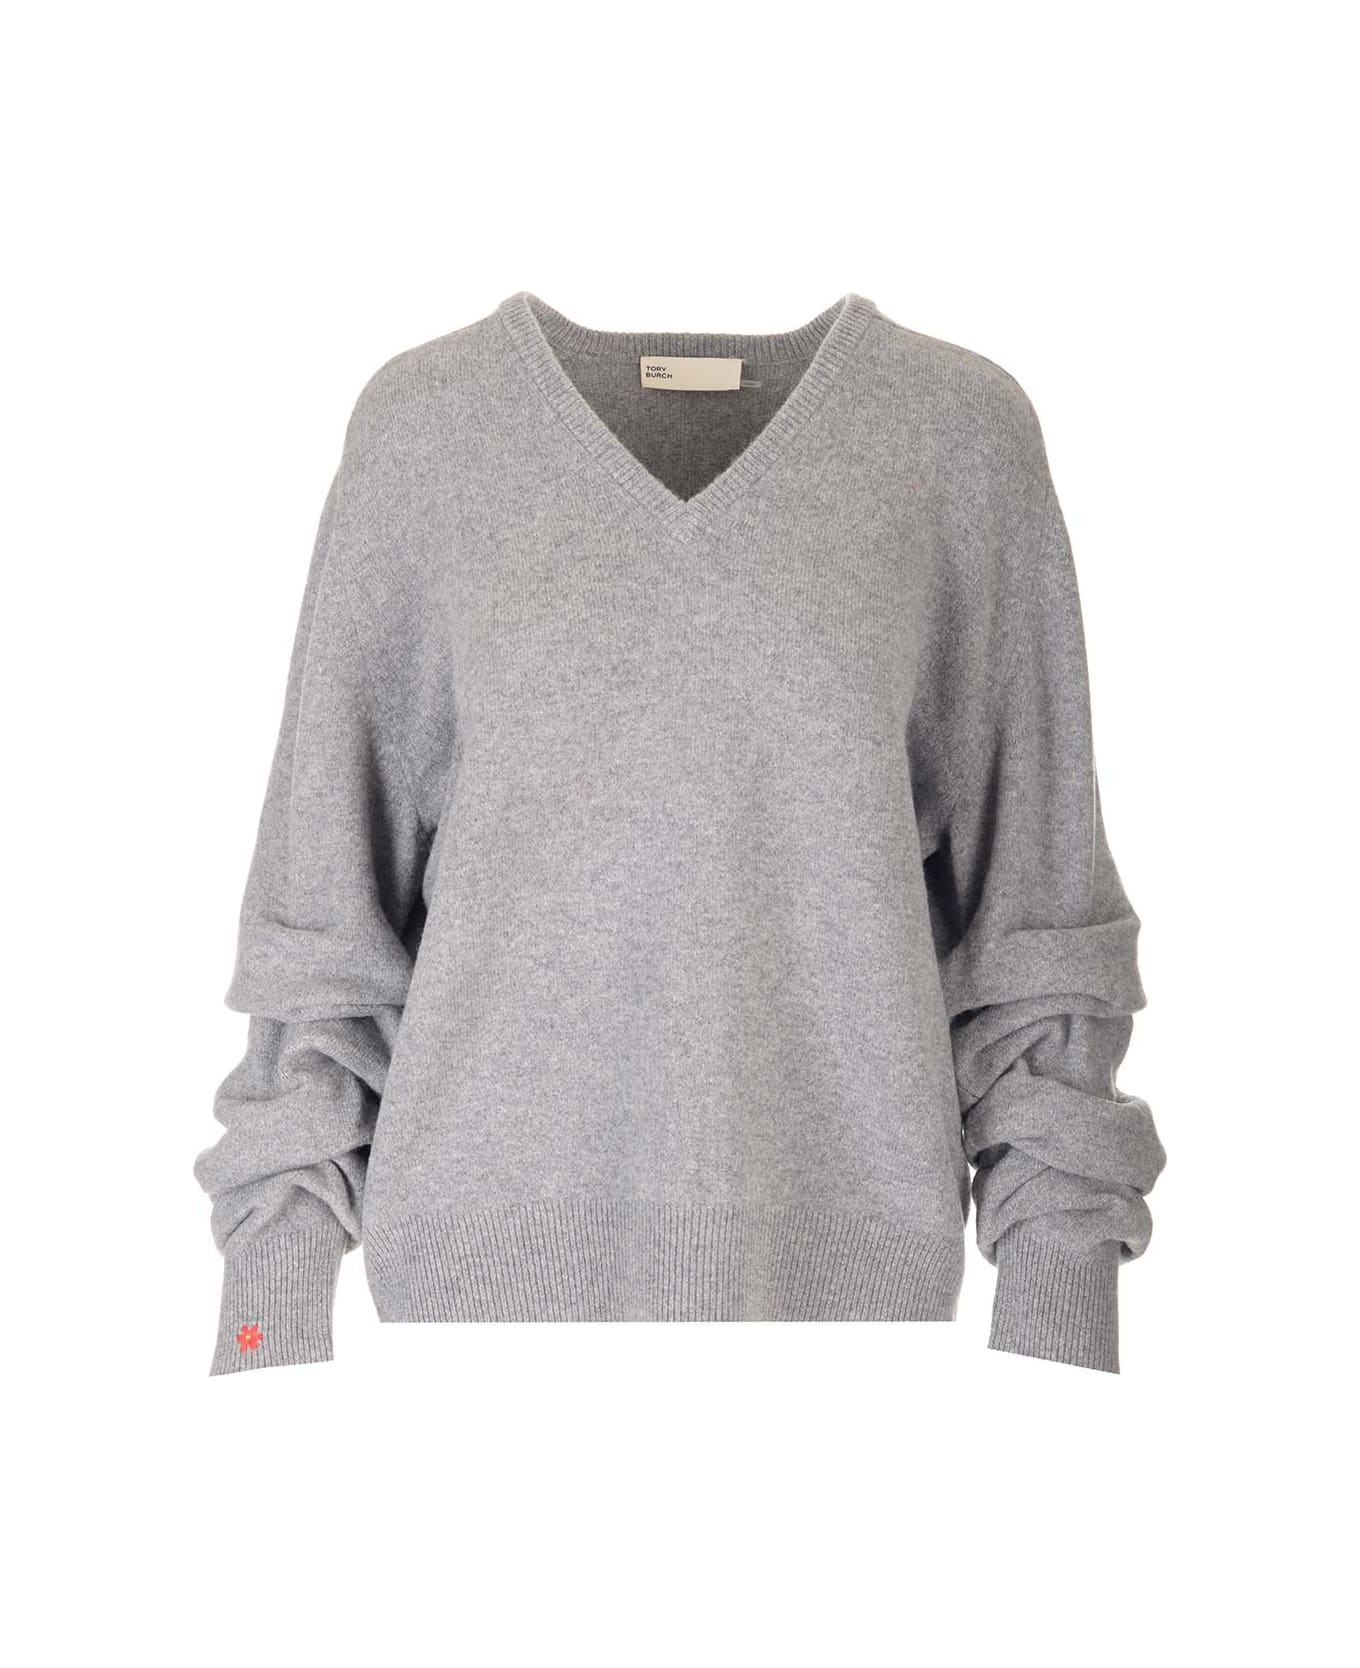 Tory Burch Gathered Sleeves Sweater - Grey